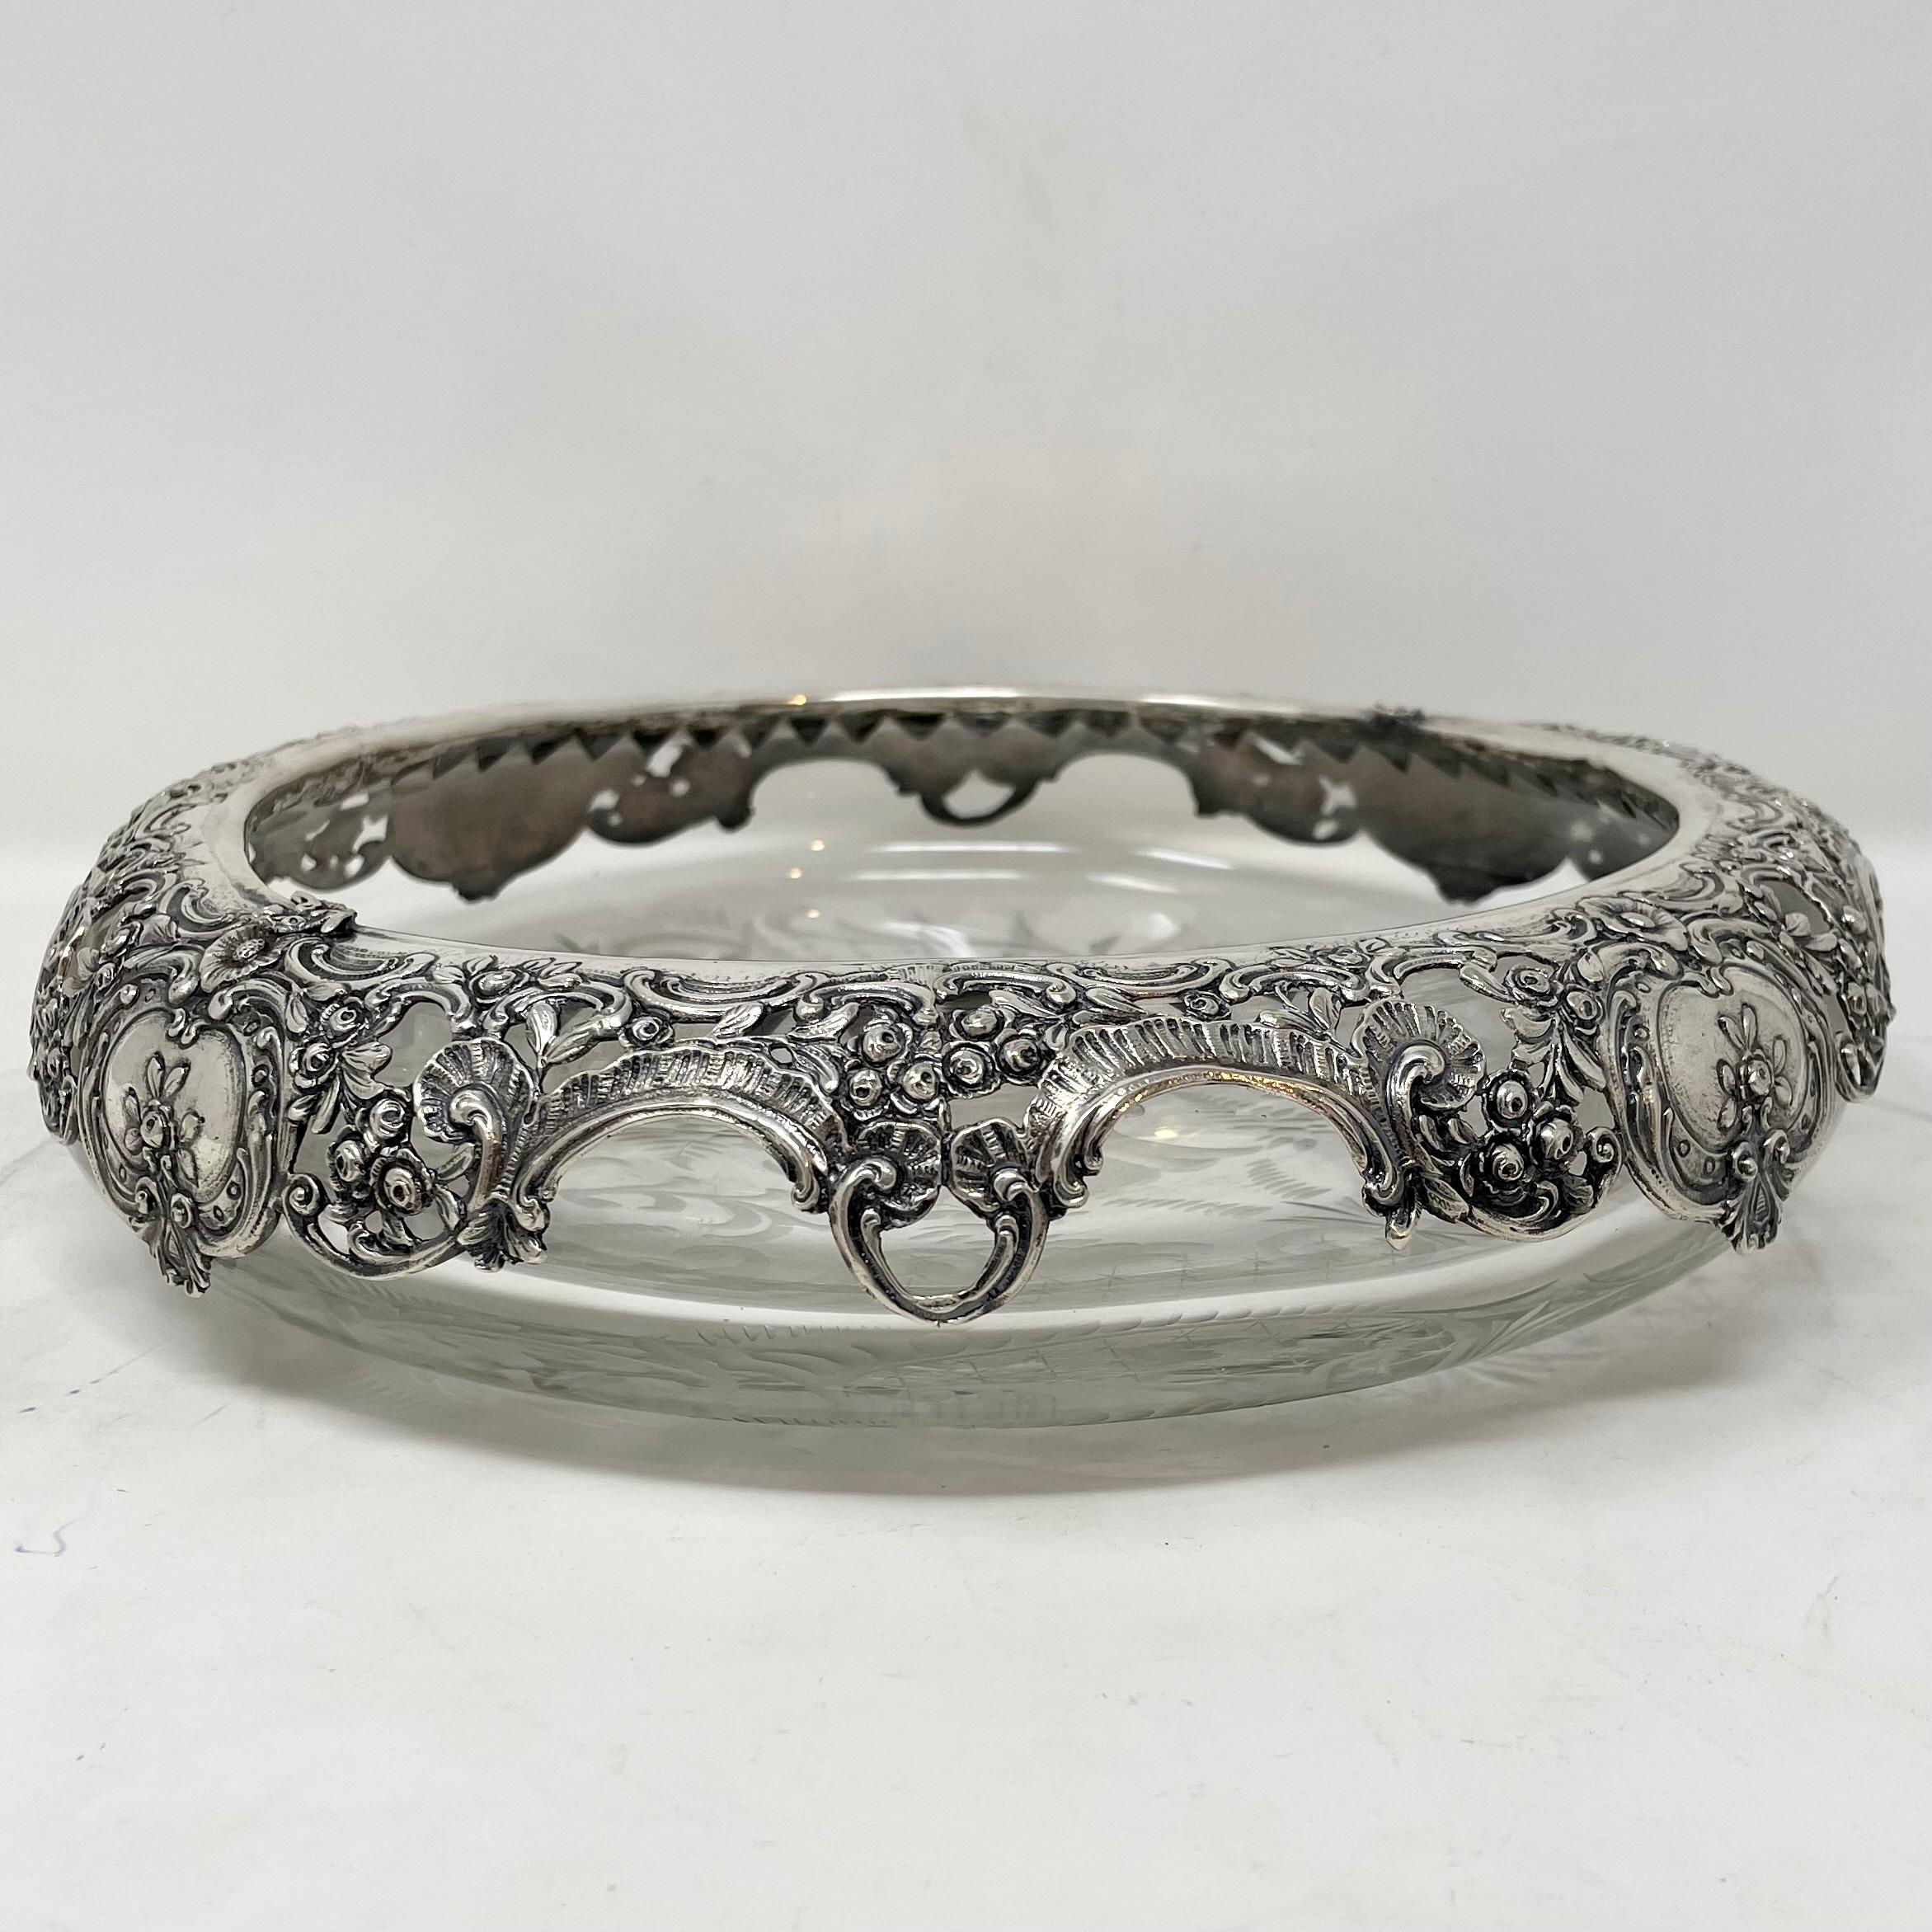 Antique cut crystal bowl with continental sterling silver mount, circa 1880-1890.